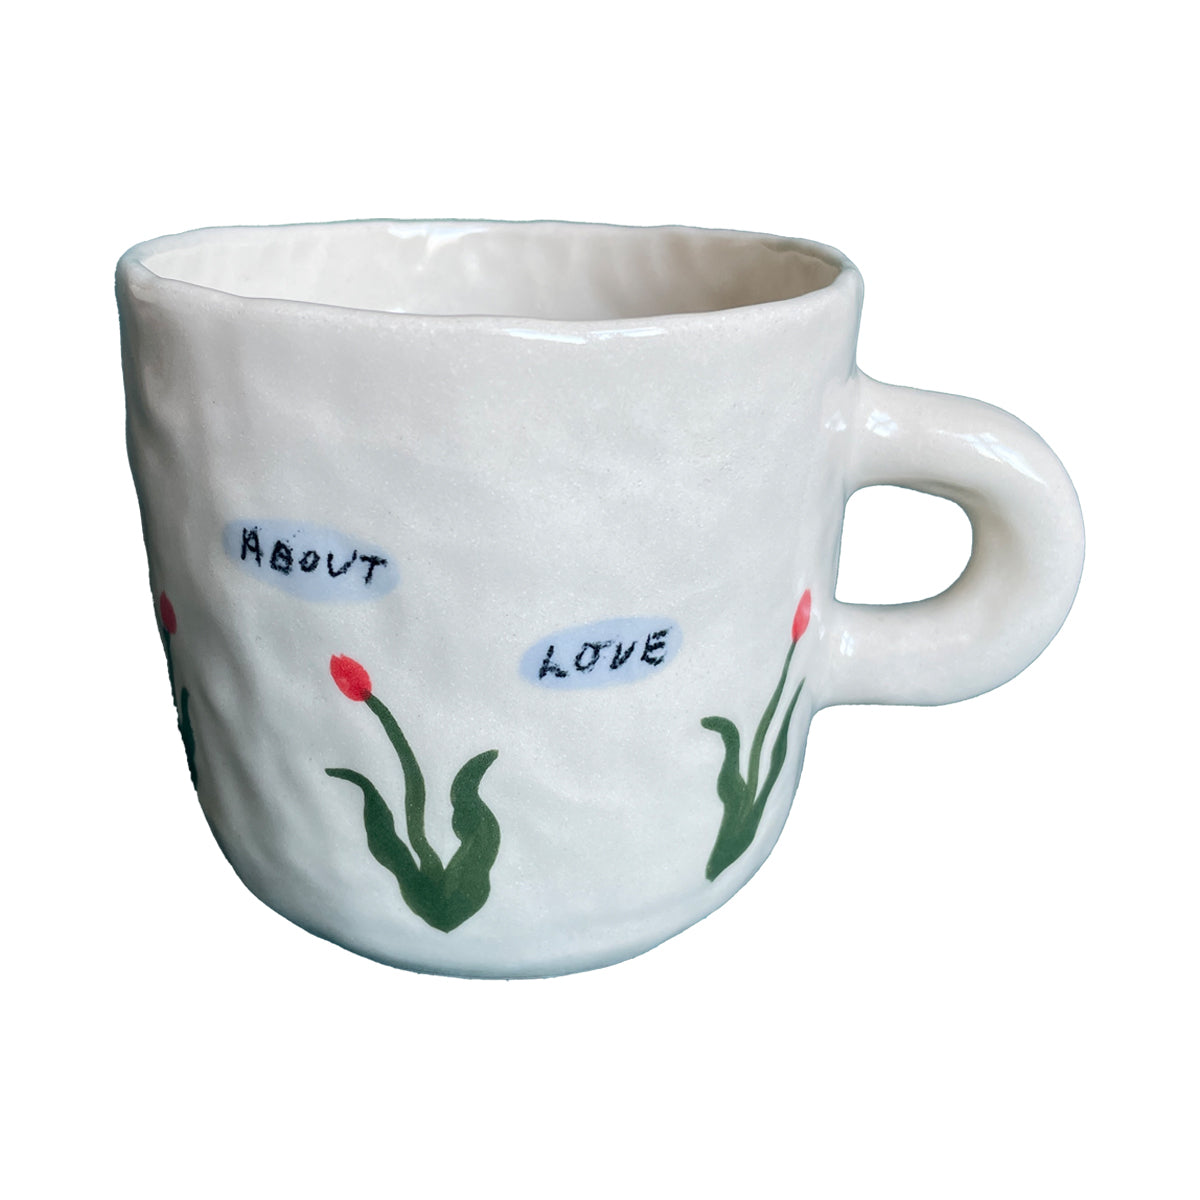 Ruth Wilde, 'I wanted to talk about love mug'